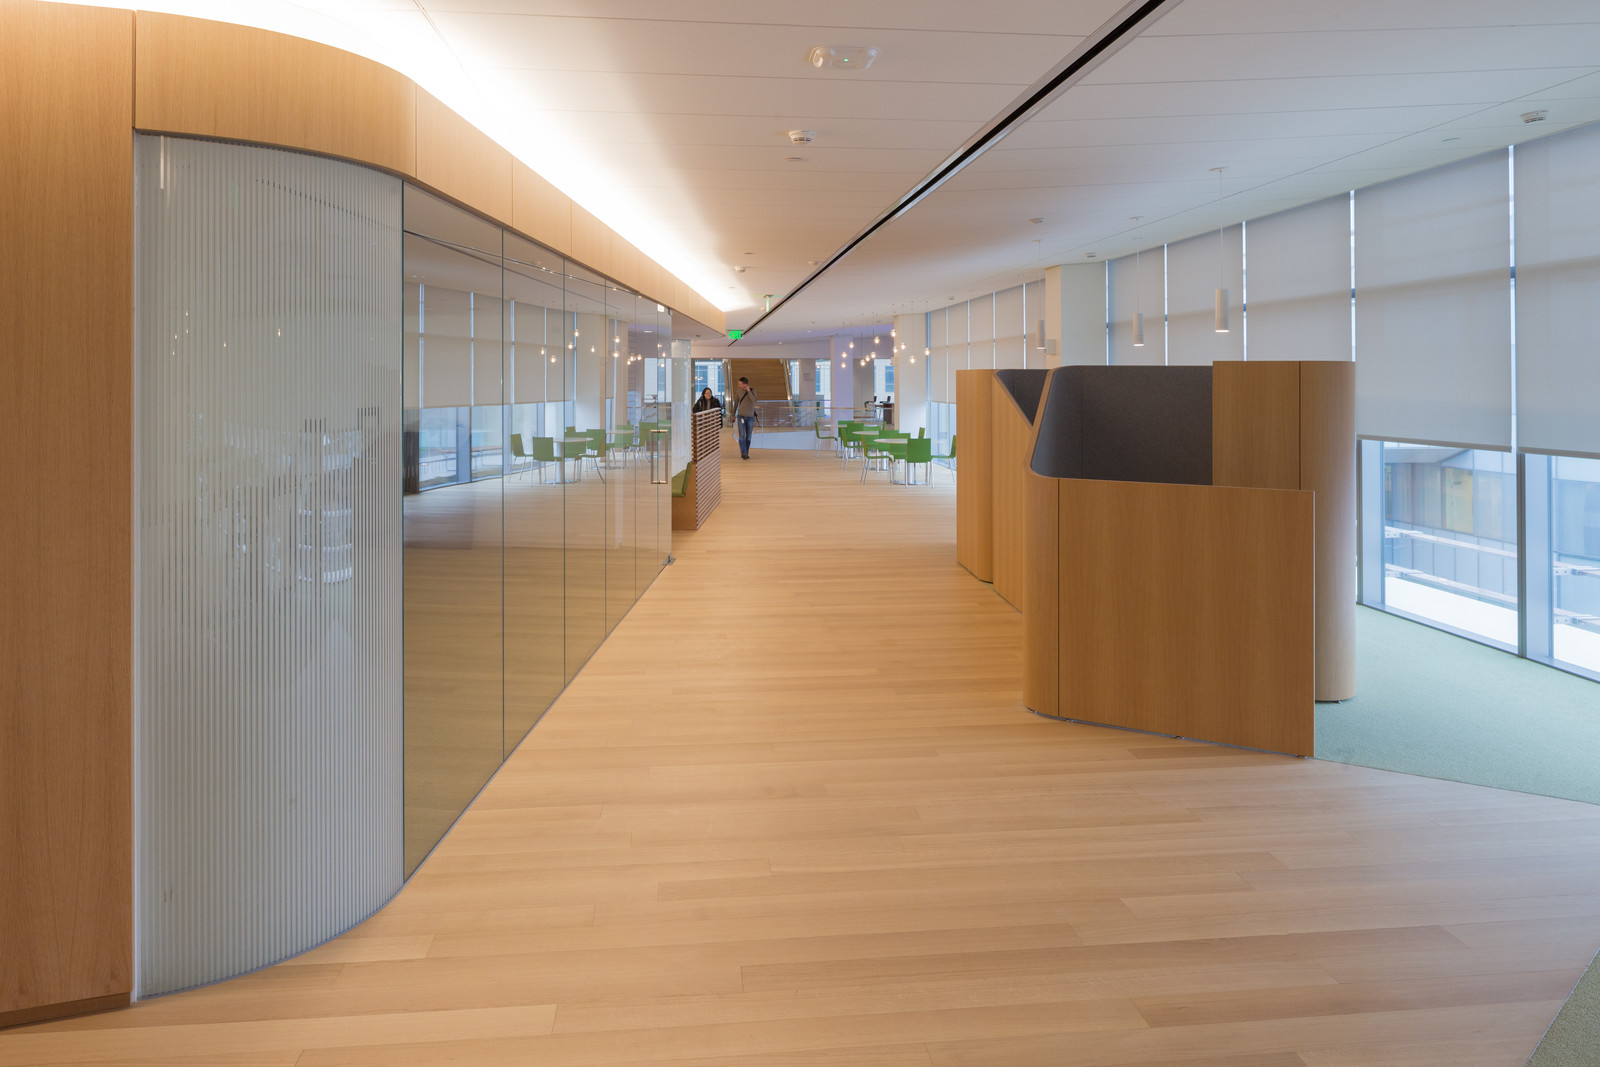 Another view of these one of a kind, custom built cubicles made out of white oak. The two buildings we worked on for the Novartis HQ were both very different but as a campus they work very well together.